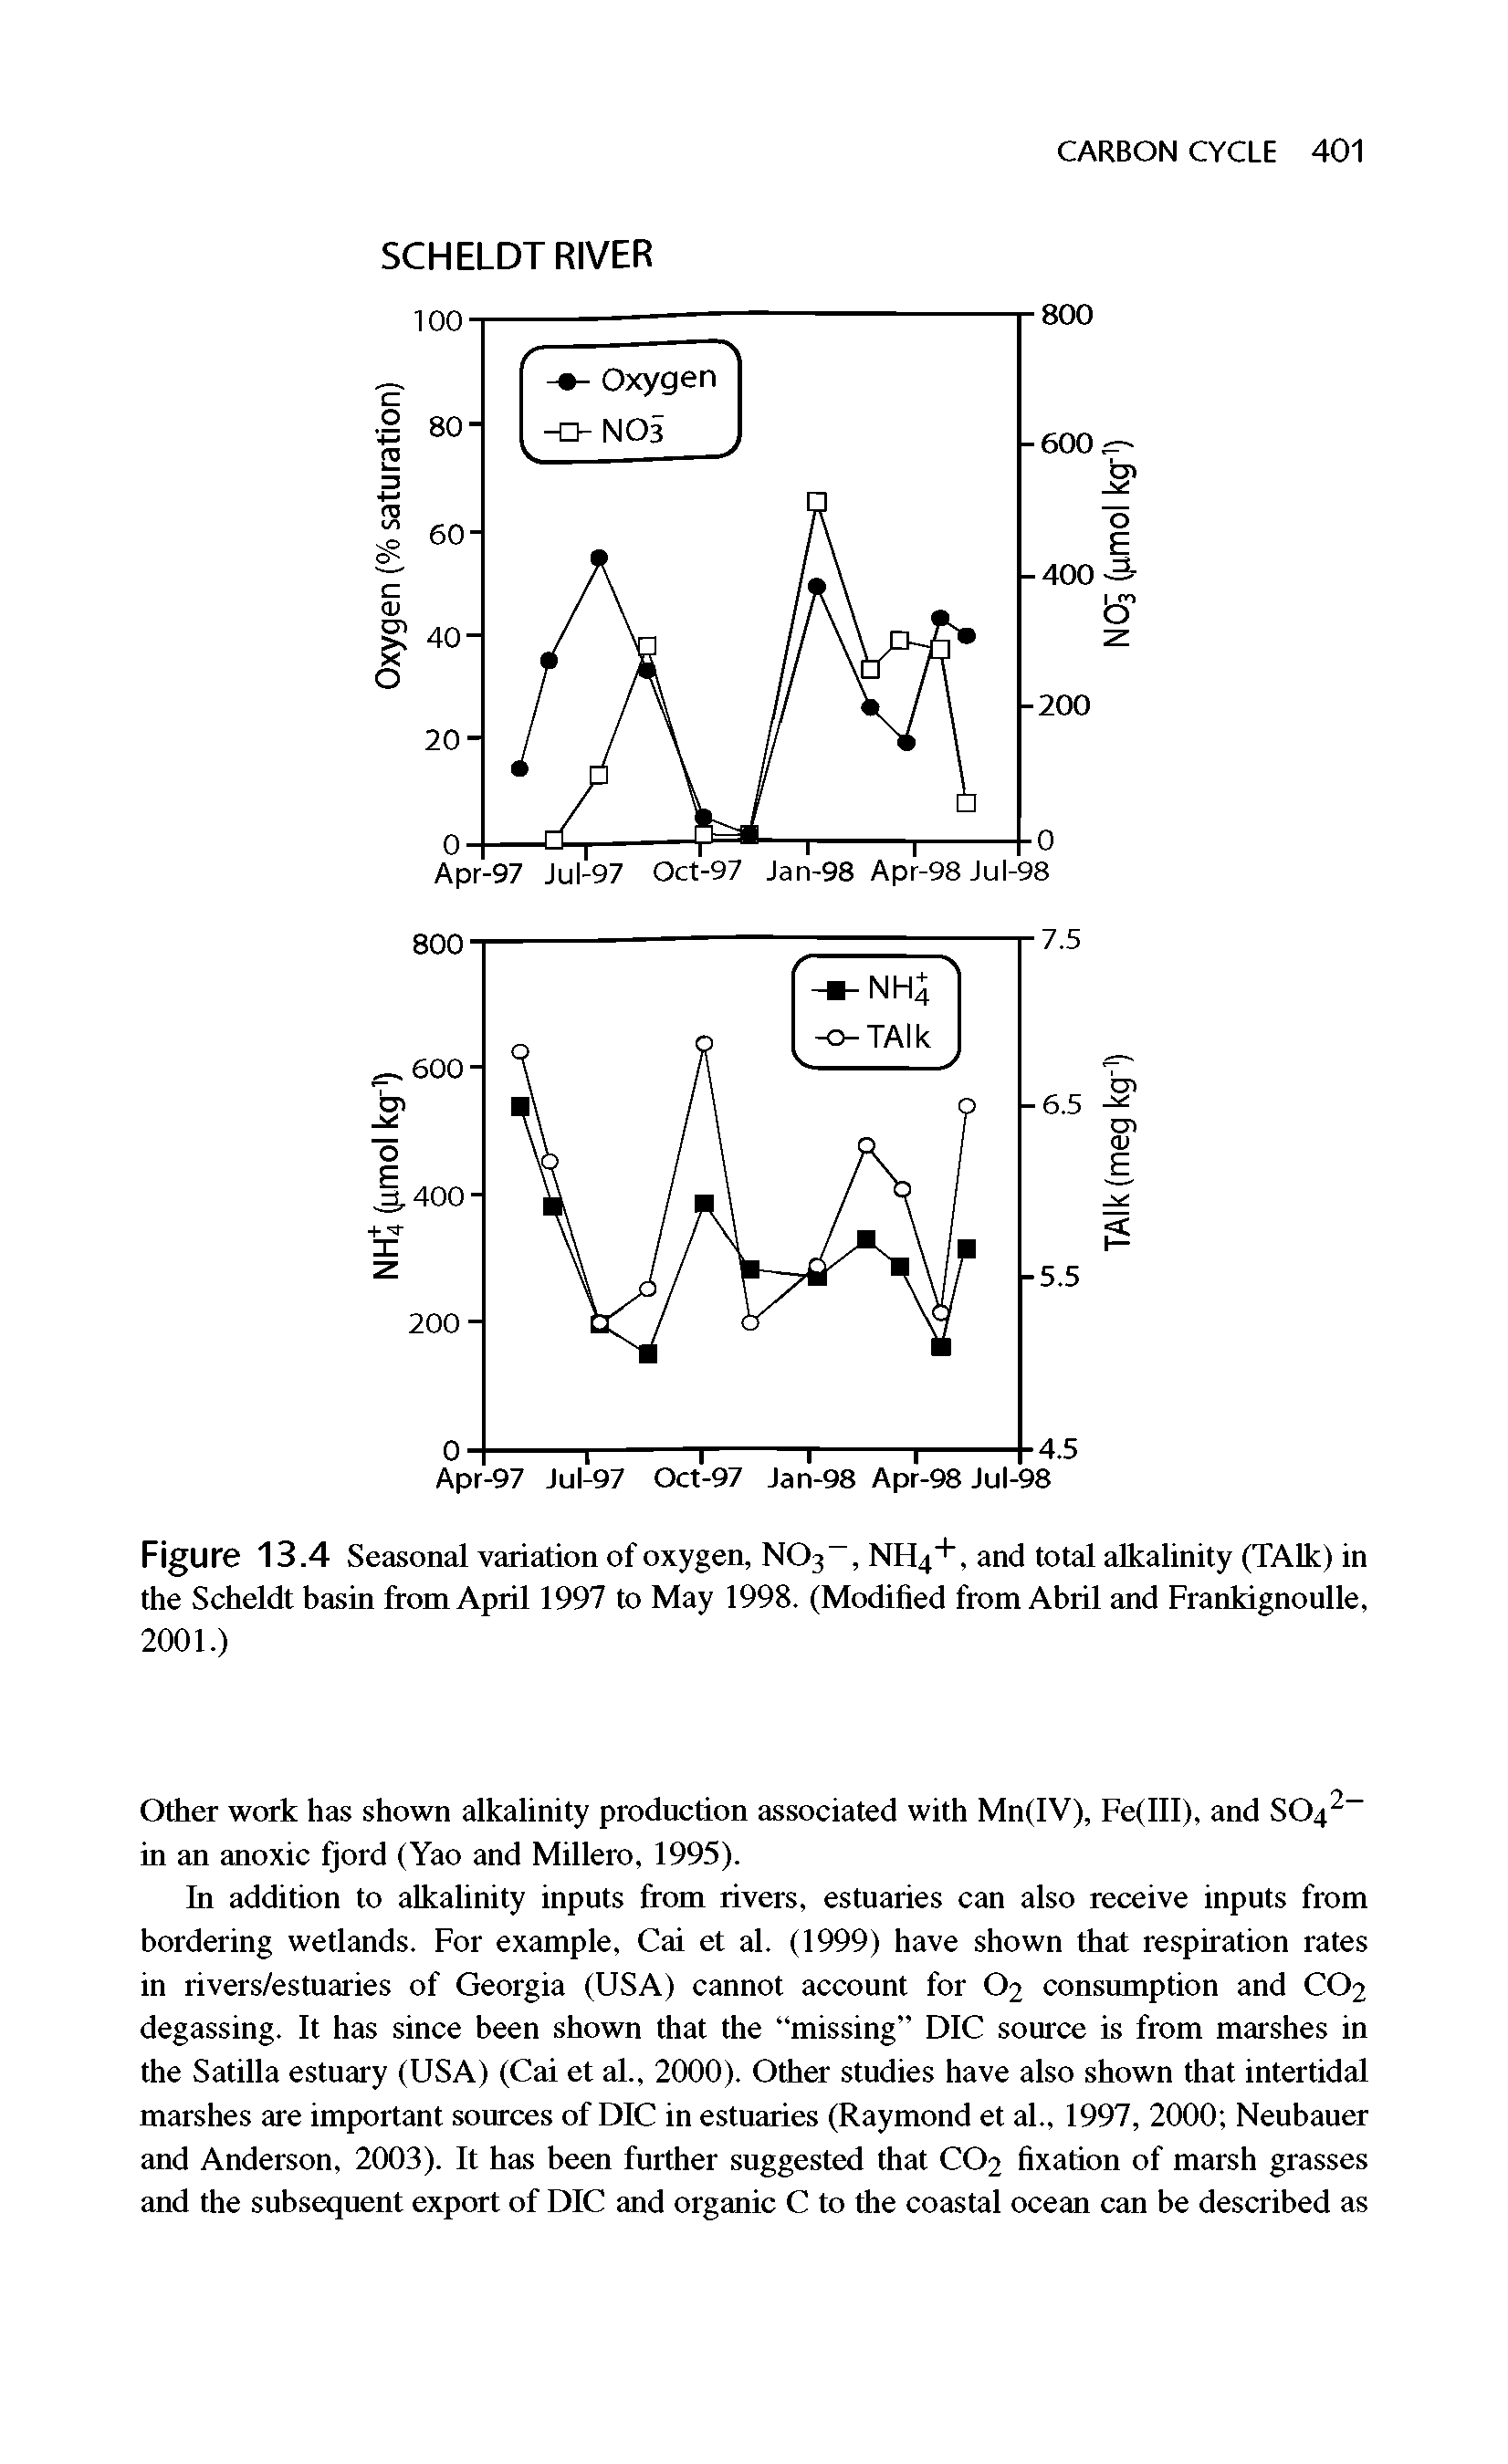 Figure 13.4 Seasonal variation of oxygen, NO3, NH4+, and total alkalinity (TAlk) in the Scheldt basin from April 1997 to May 1998. (Modified from Abril and Frankignoulle, 2001.)...